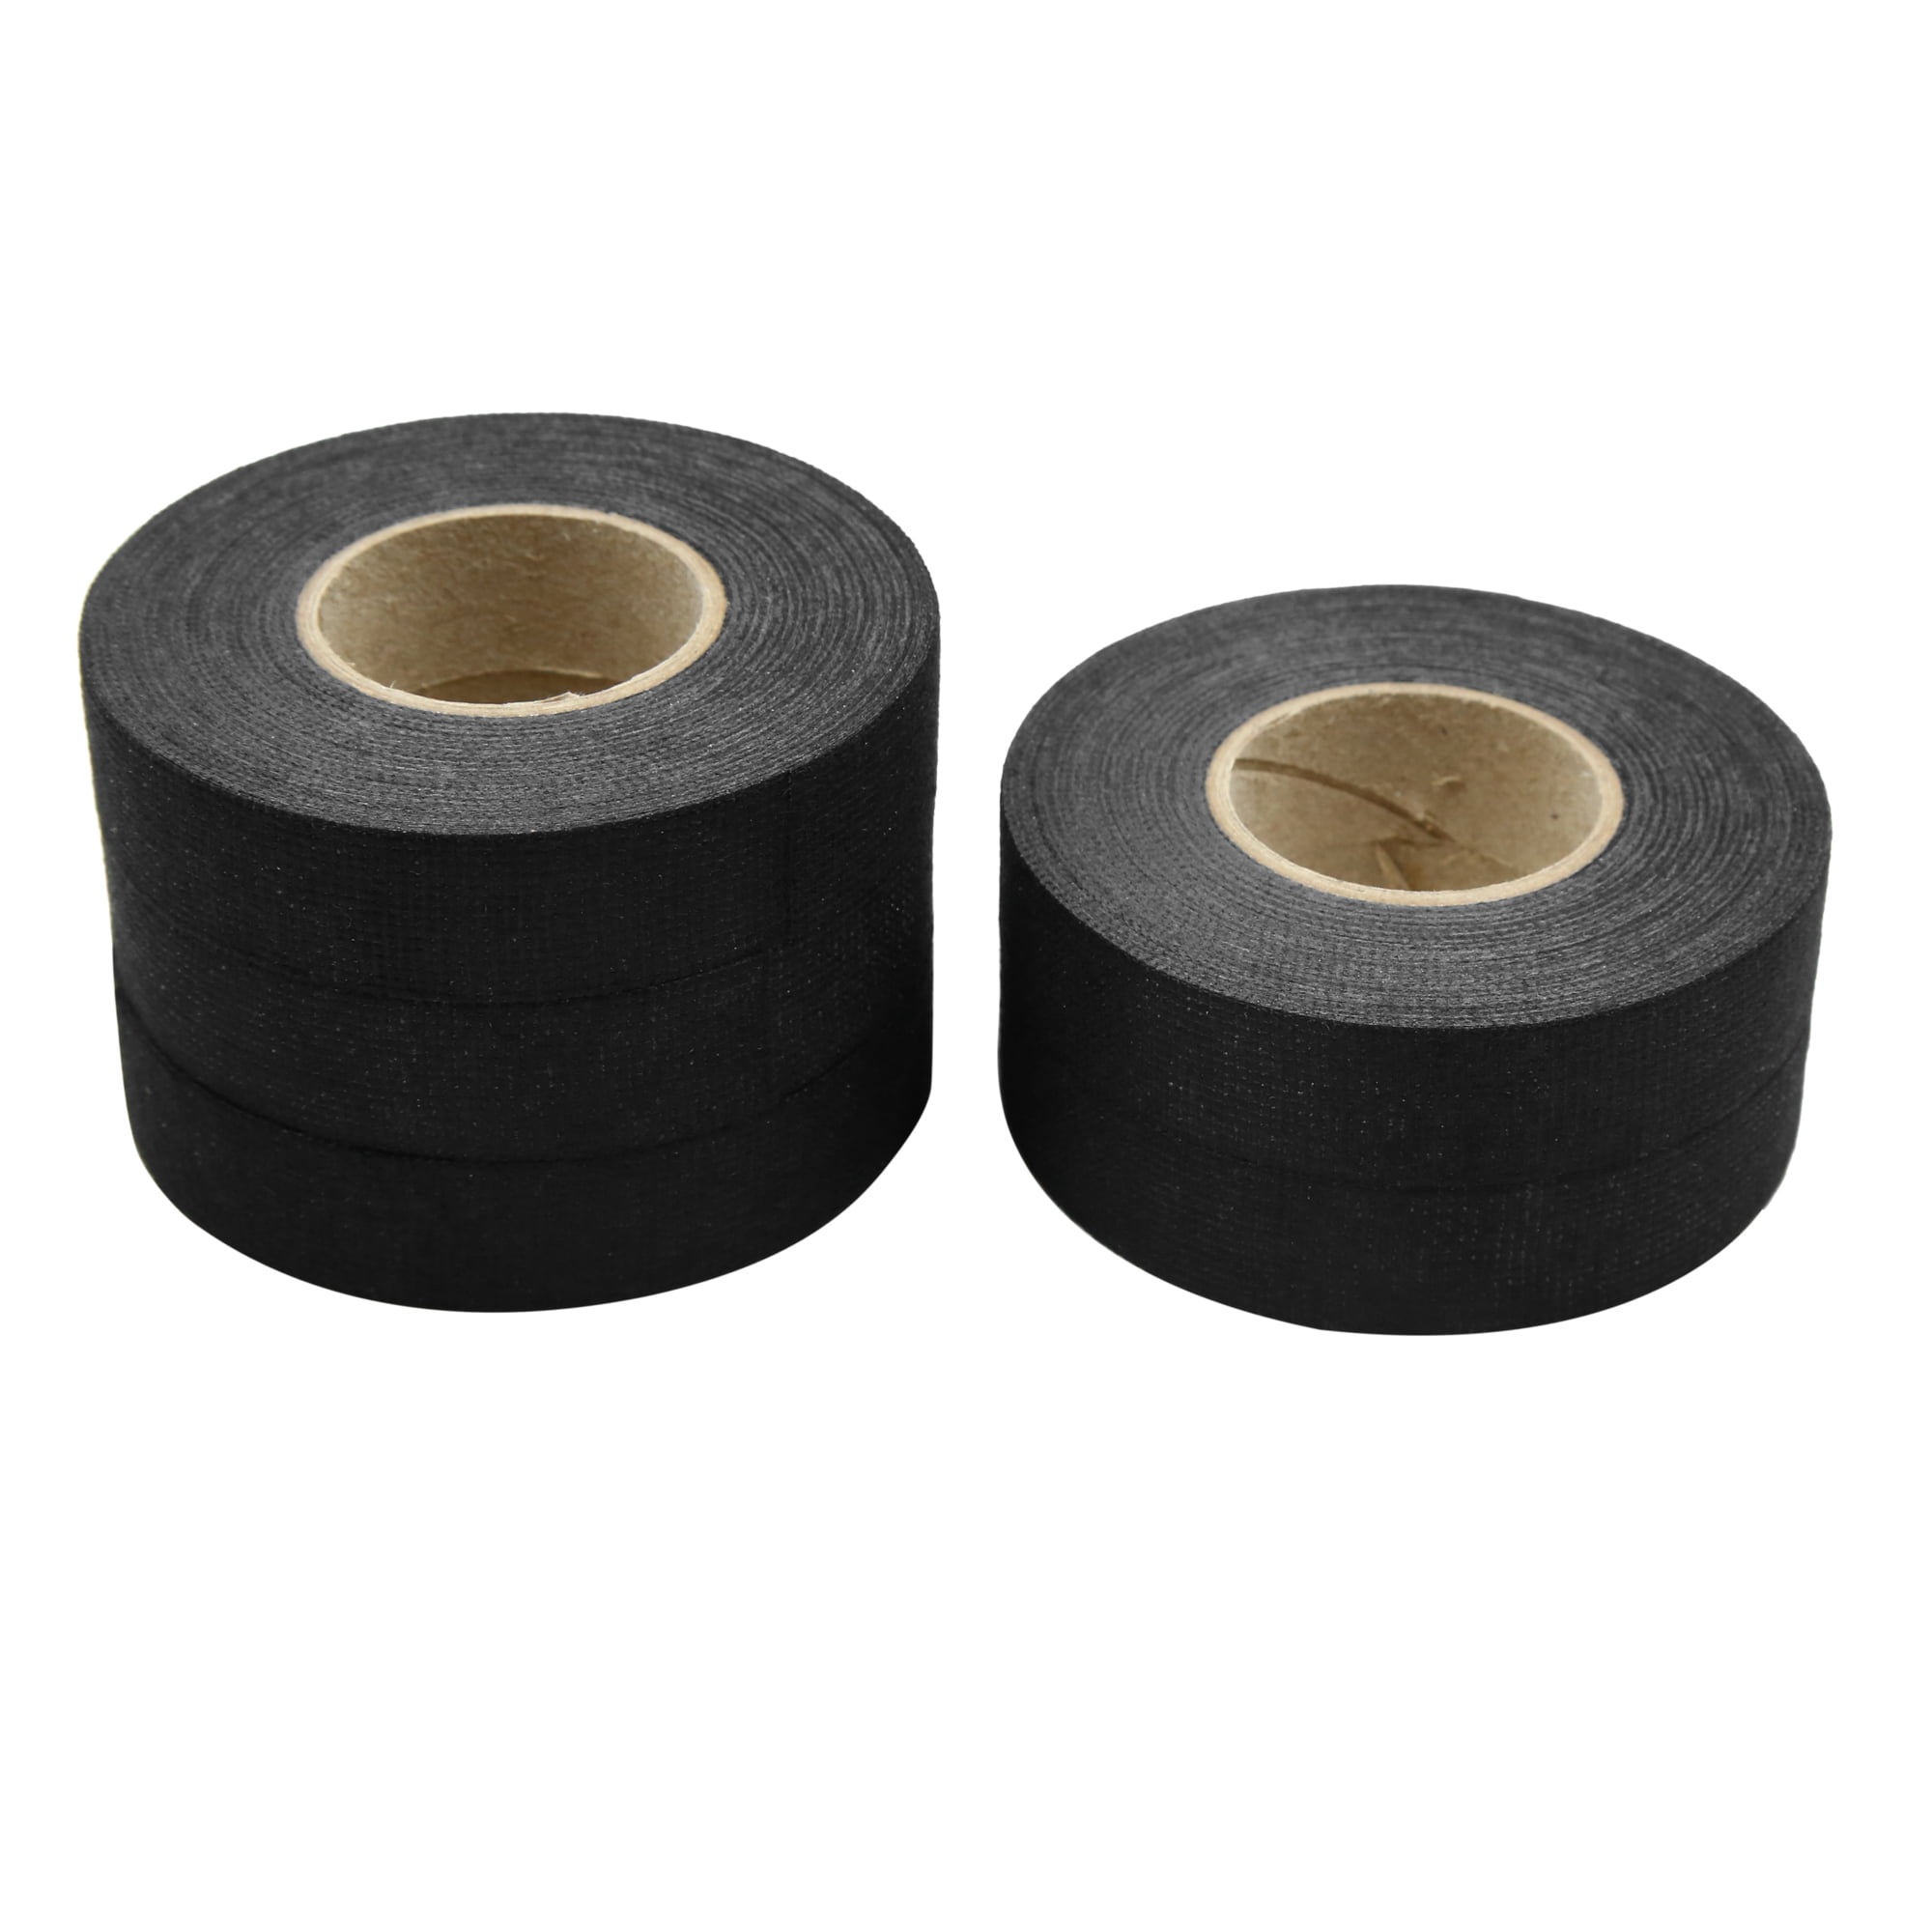 Wiring Harness Cloth Tape Black Adhesive Fabric Tape for Automobile Electrical Wire harness Noise Damping Heat Proof Fire Resistant 19 mm X 15m Cloth Tape for Wire Loom Harness 5 Pack